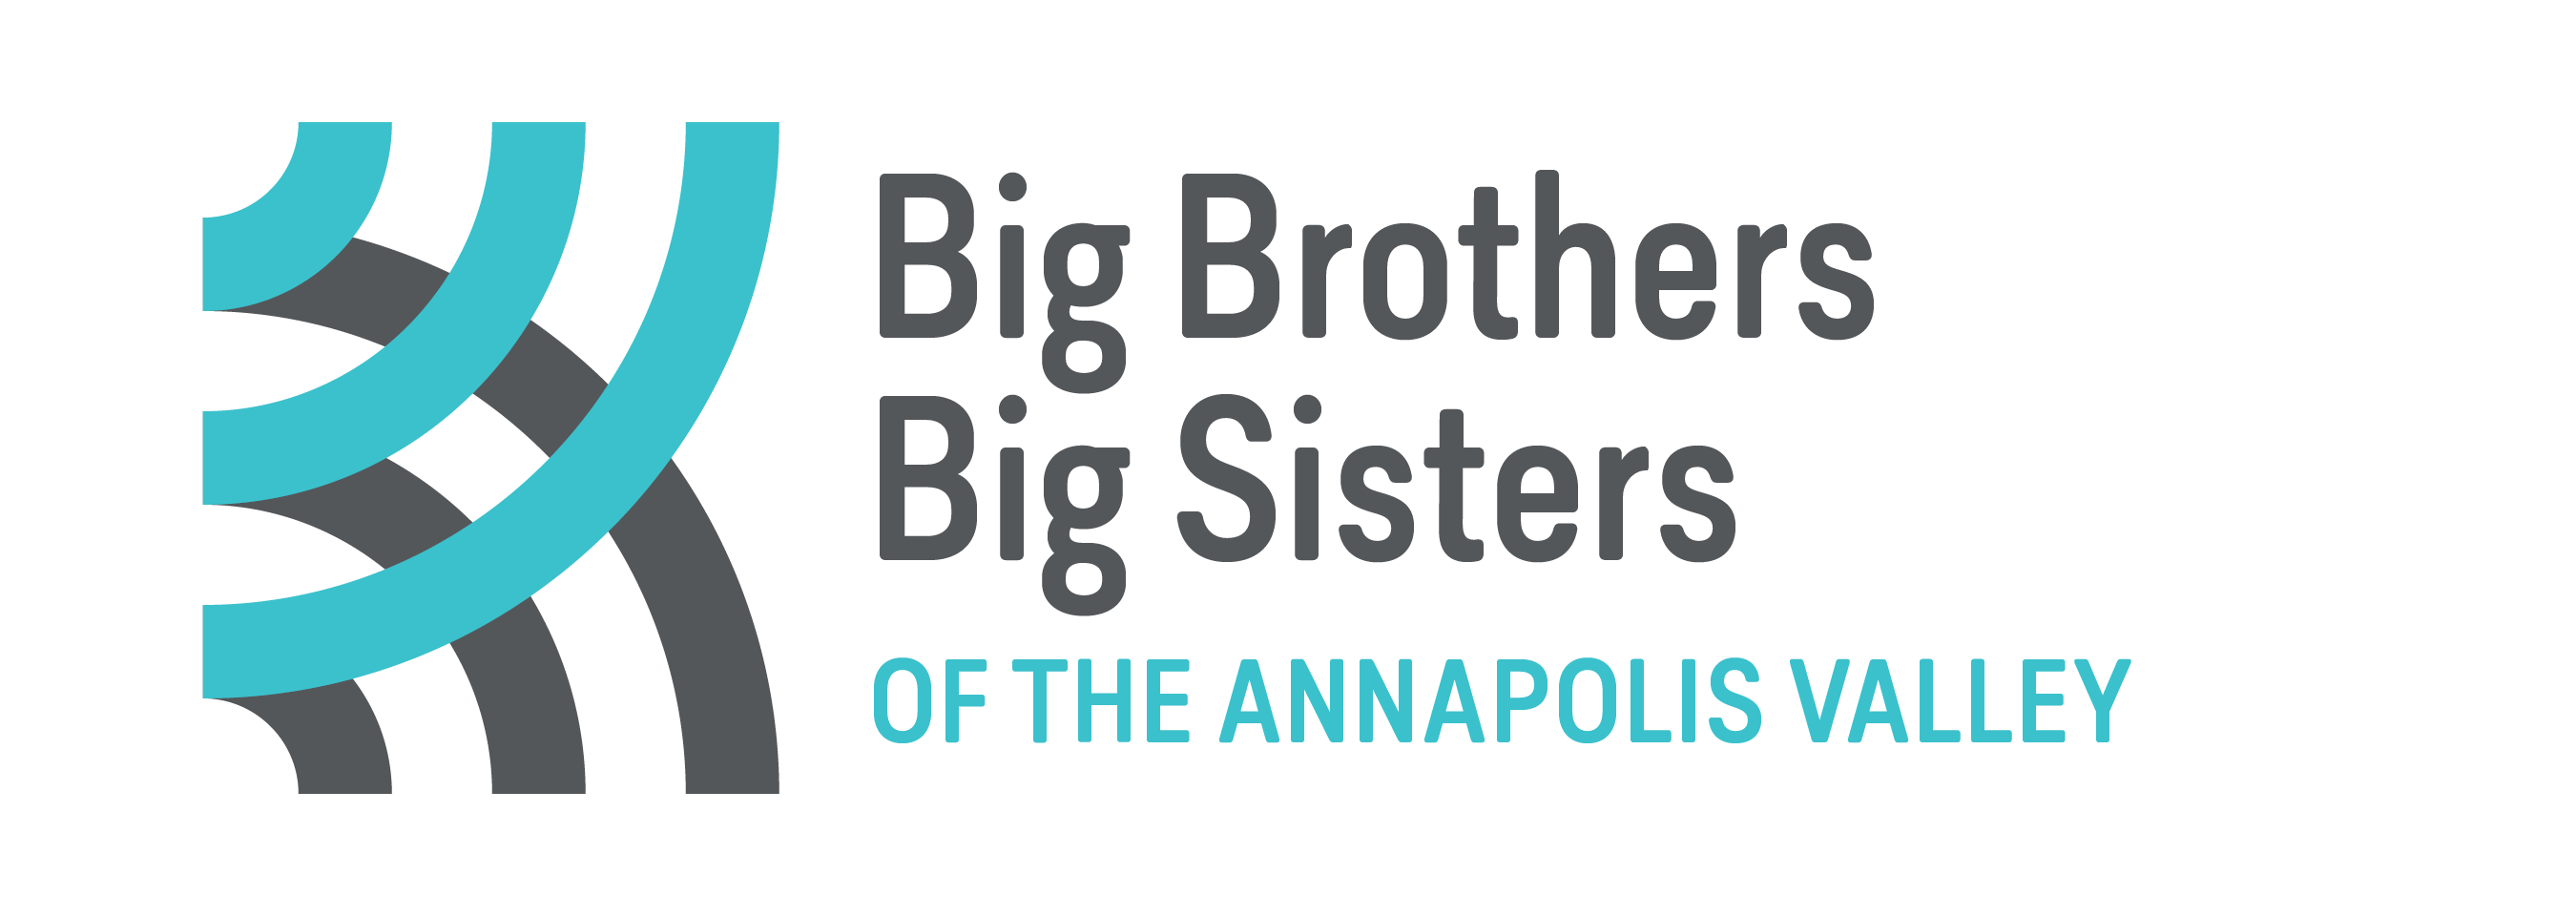 Big Brothers Big Sisters of the Annapolis Valley